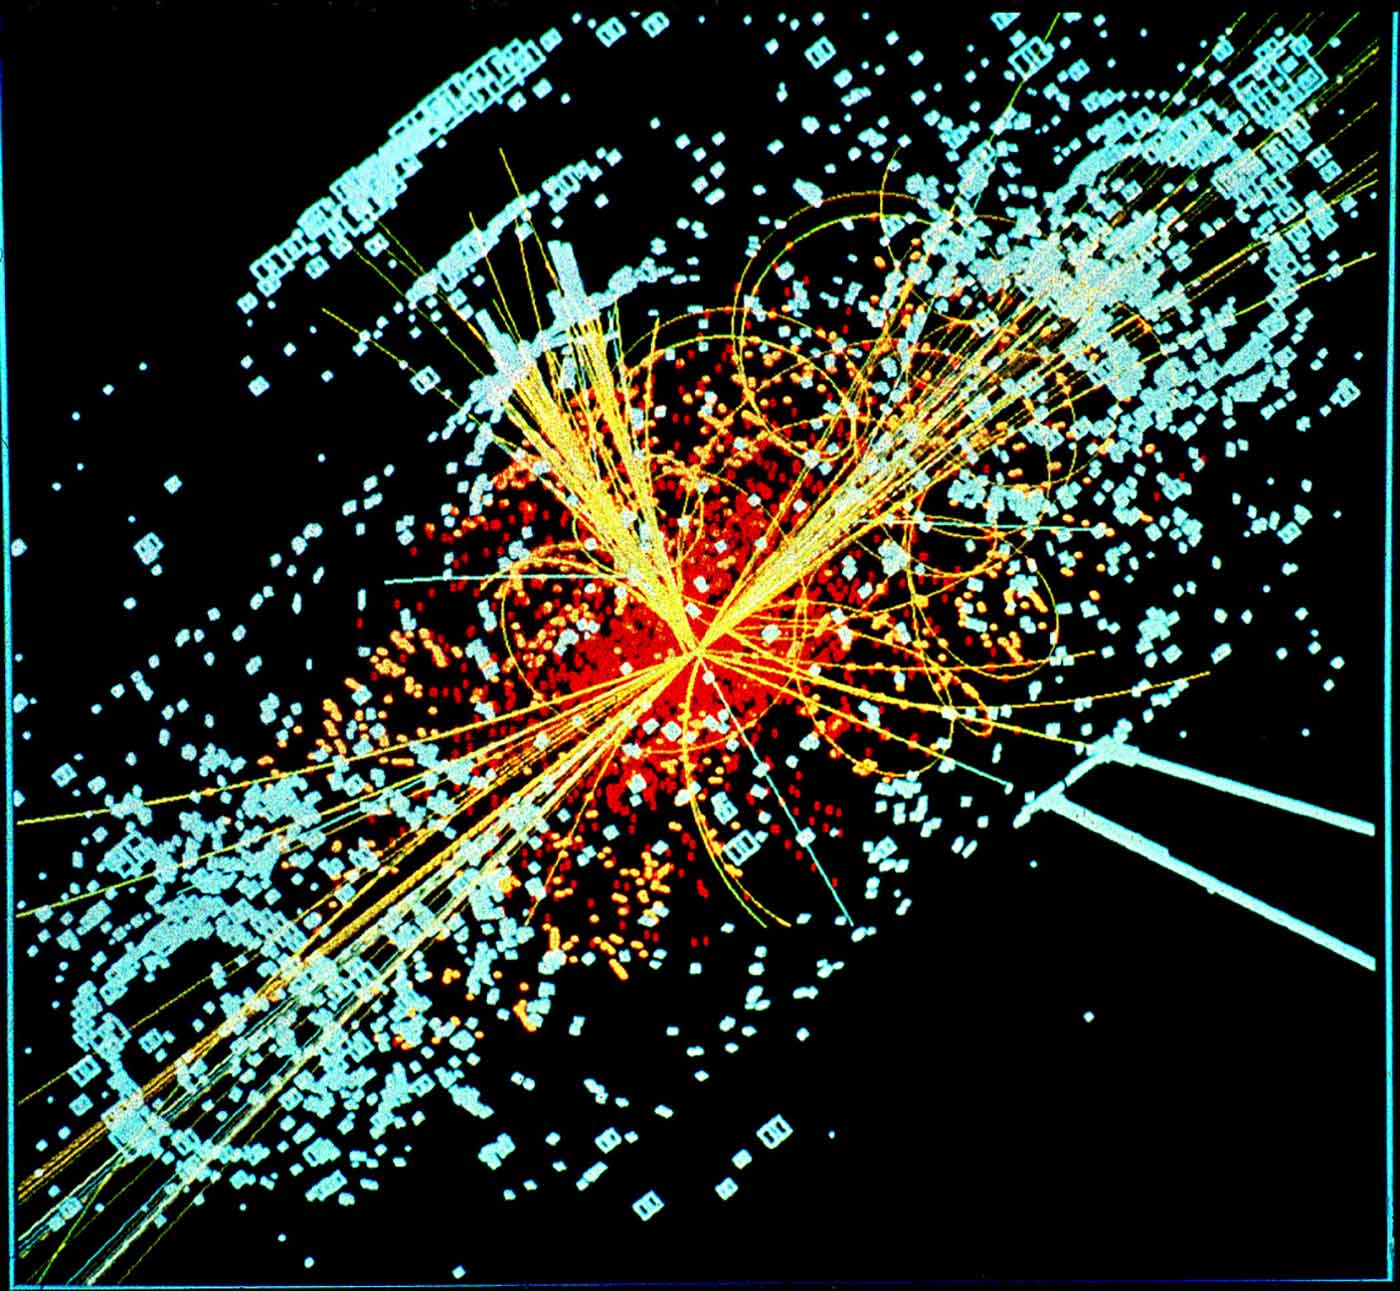 An example of simulated data modeled for the CMS particle detector on the Large Hadron Collider (LHC) at CERN.